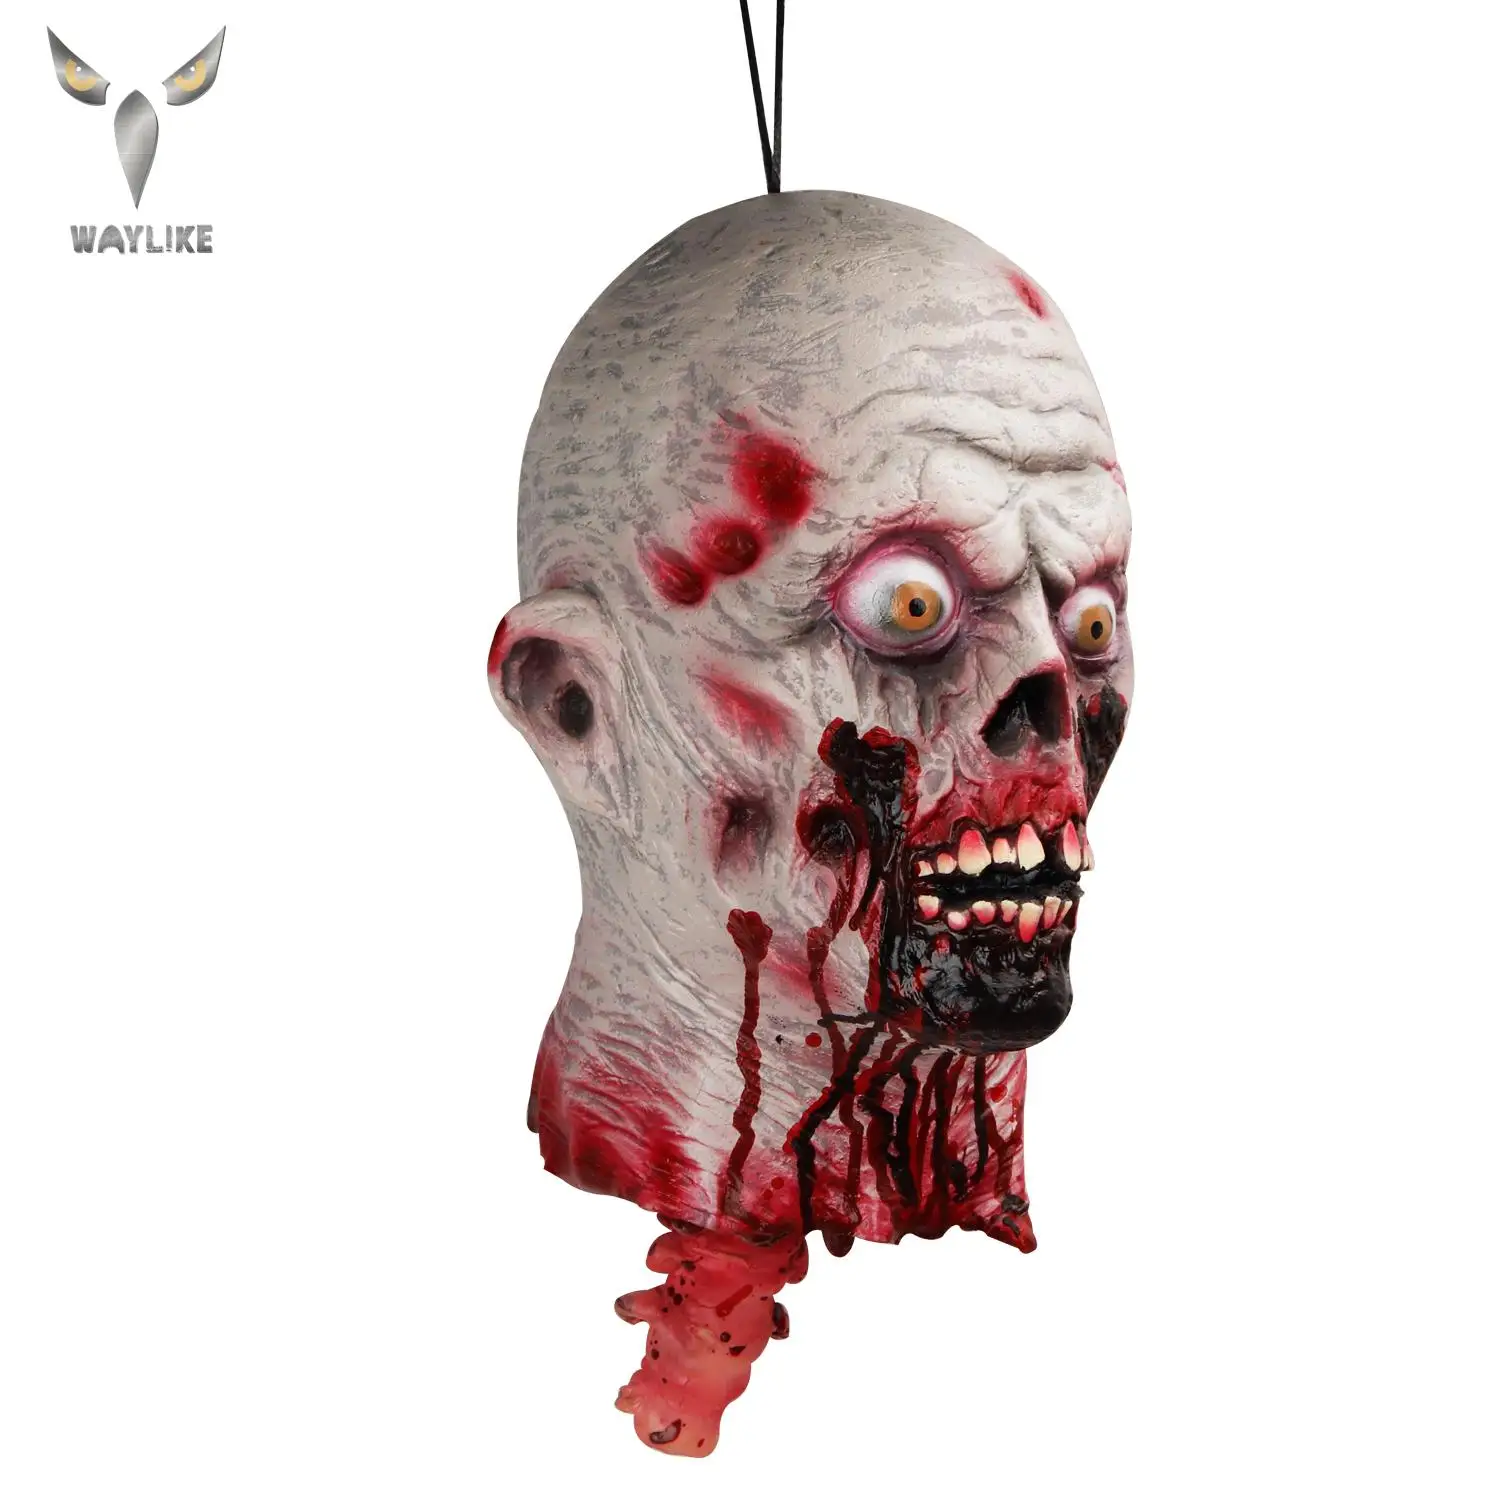 

WAYLIKE Halloween Scary Props Ghost Broken Head Decoration Head For Halloween Haunted House Party Decoration Prop